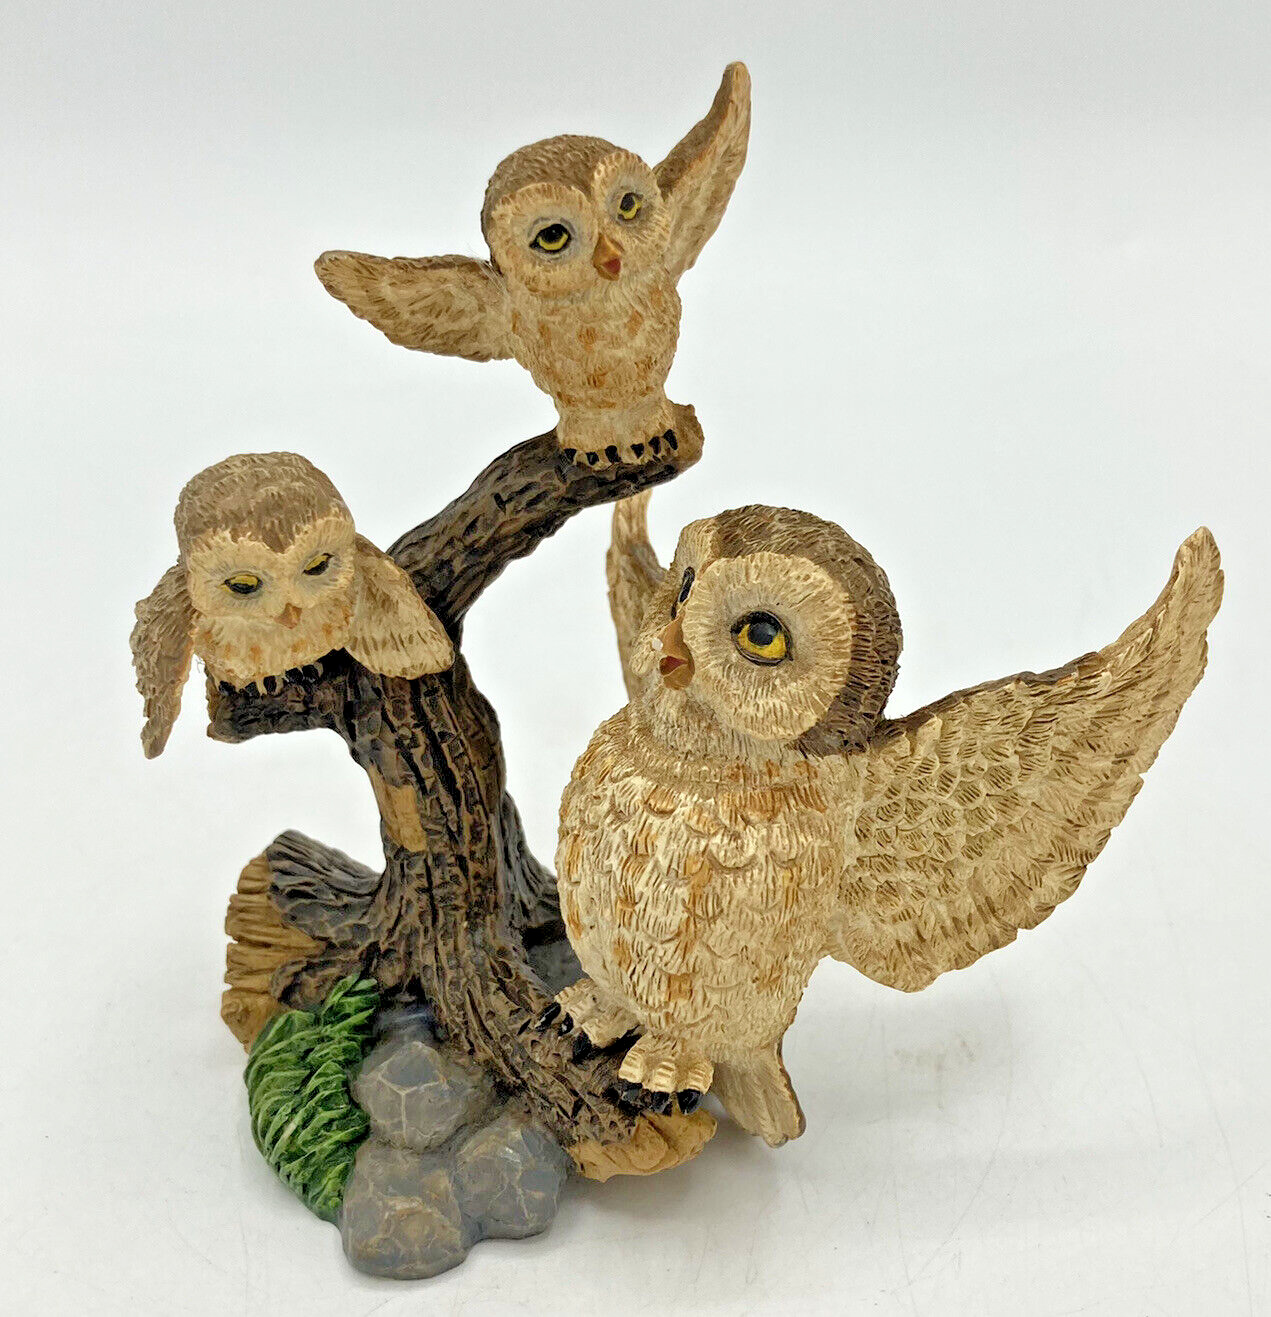 1997 Hamilton Lil’ Whoots Mothers Inspiration Sculpture Collection Owl Figurine